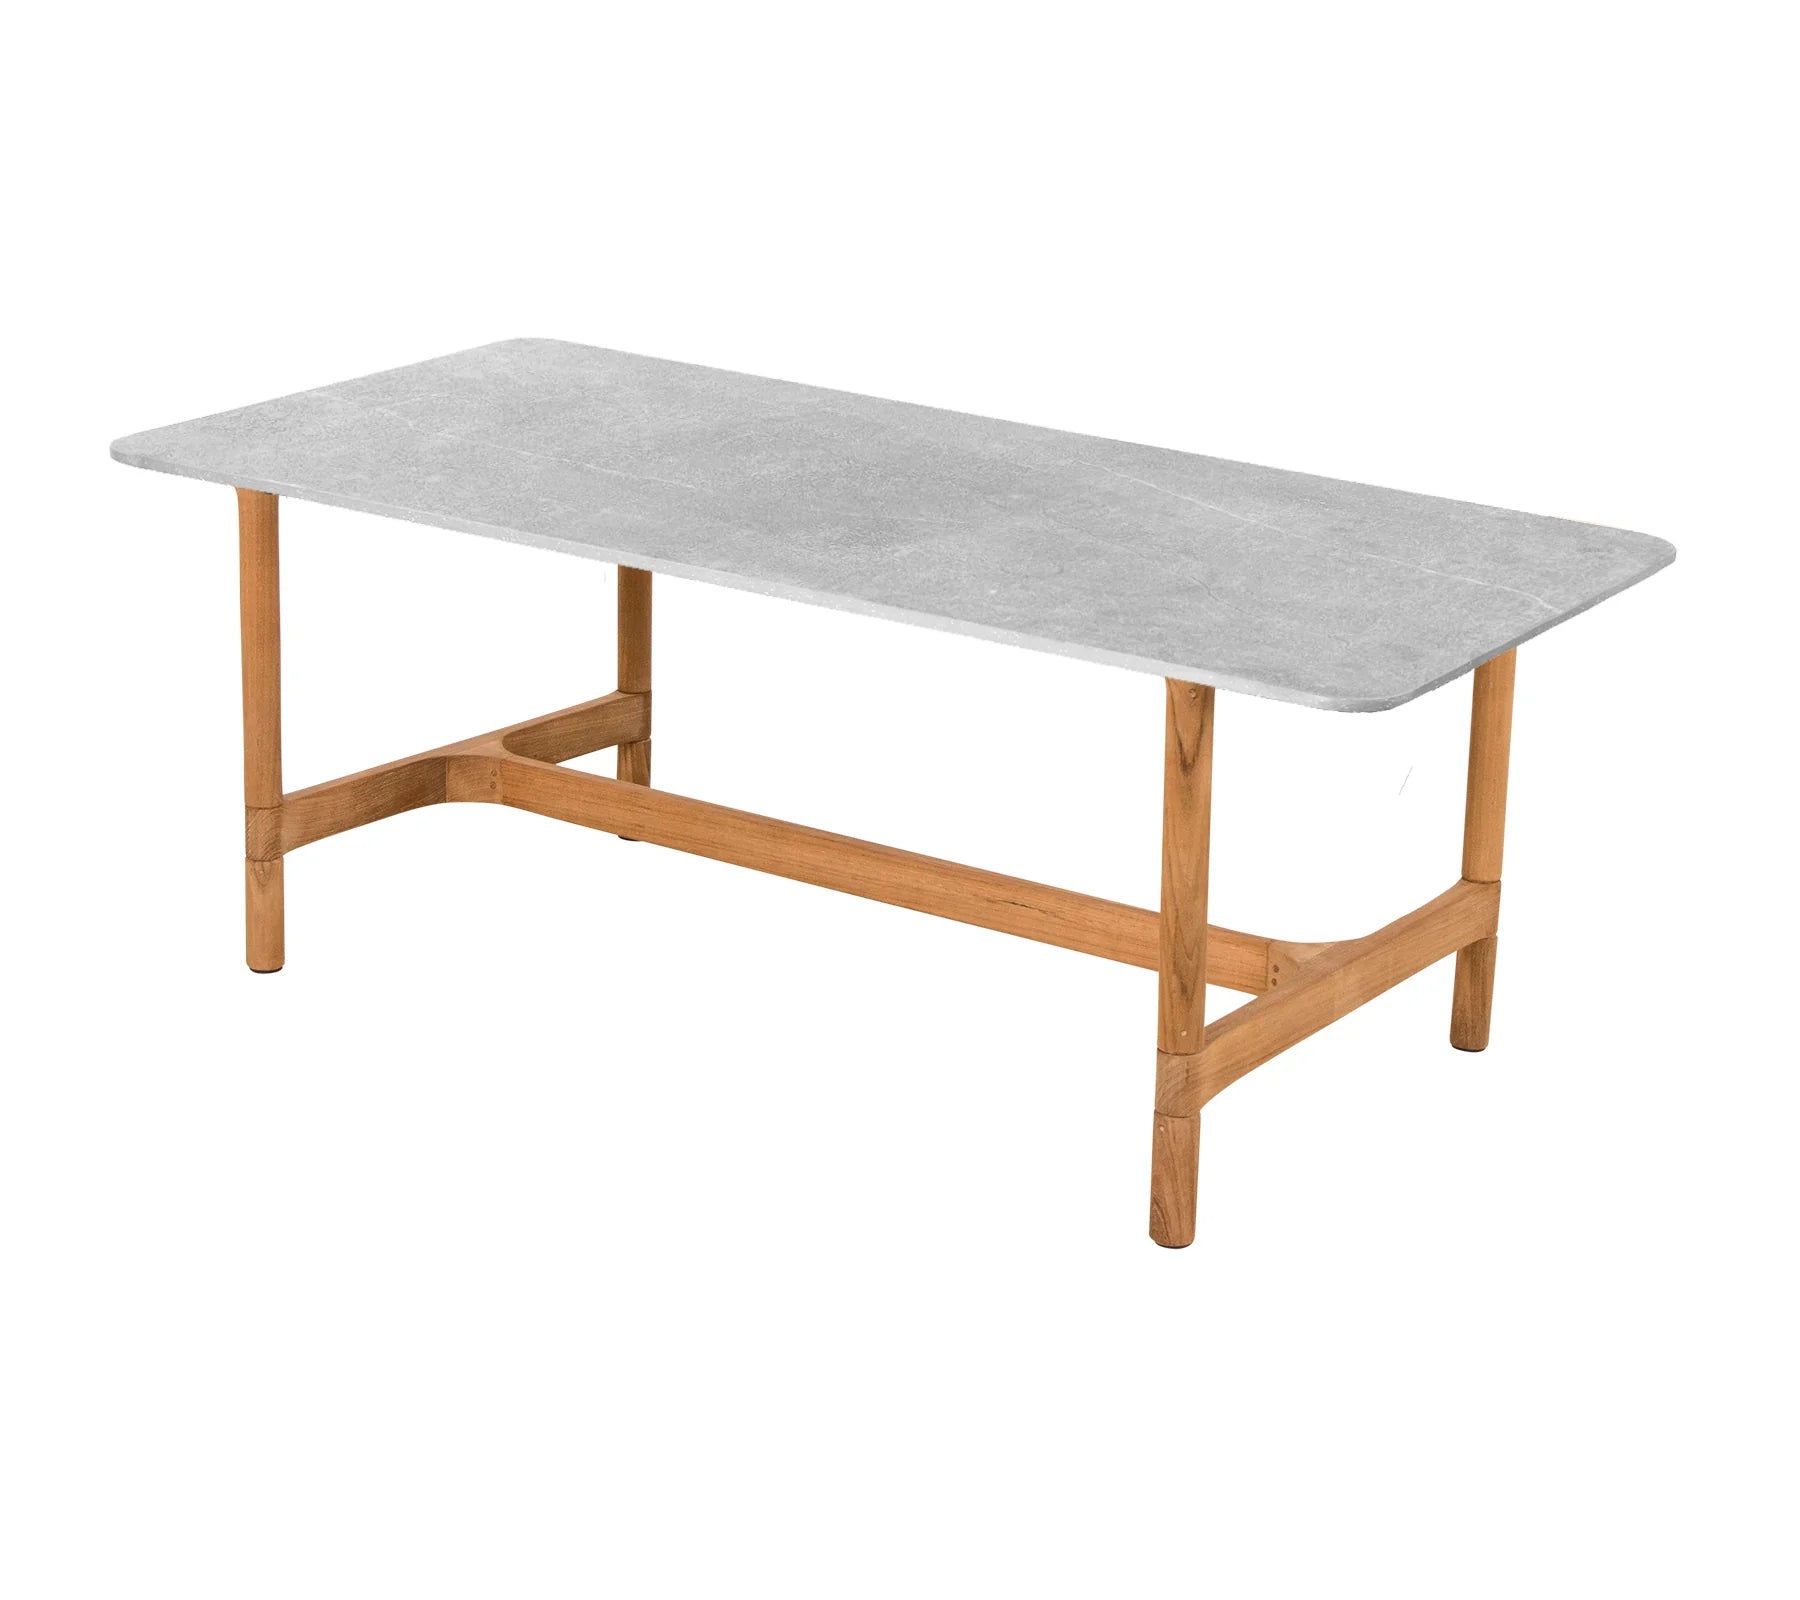 Fossil Grey Ceramic Table Top